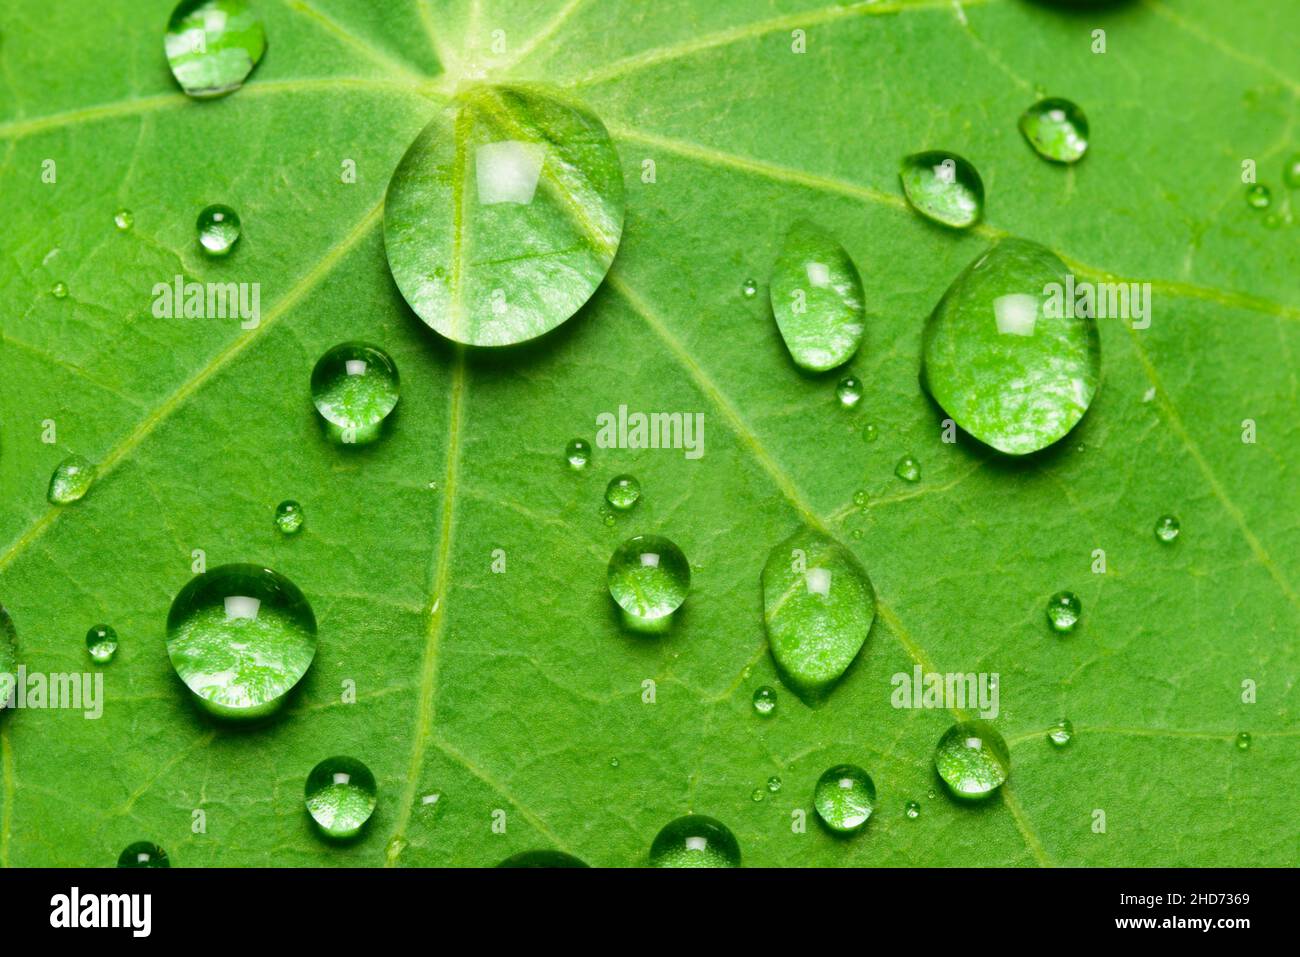 lotus effect with pearling water drops on surface. Stock Photo